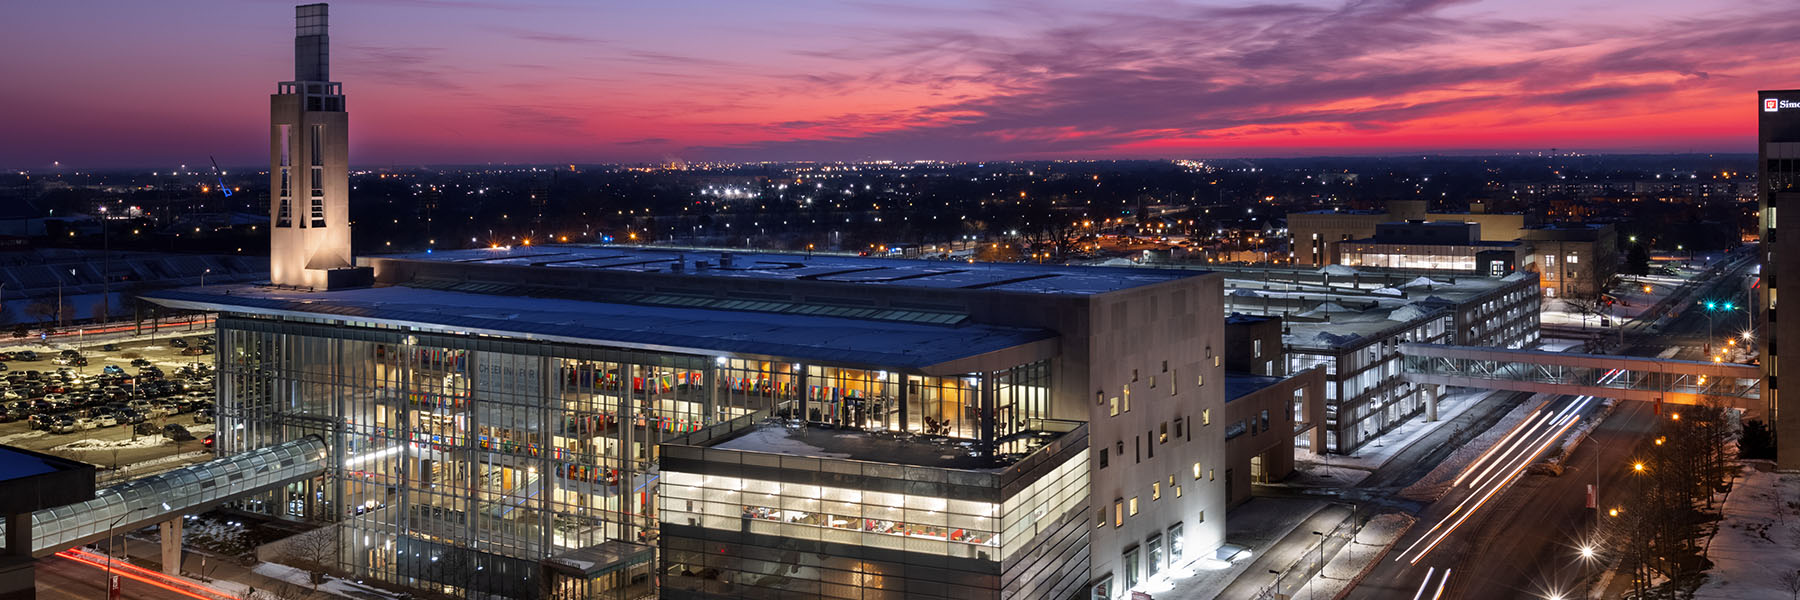 Exterior view of IU Indianapolis campus center and surrounding areas at night